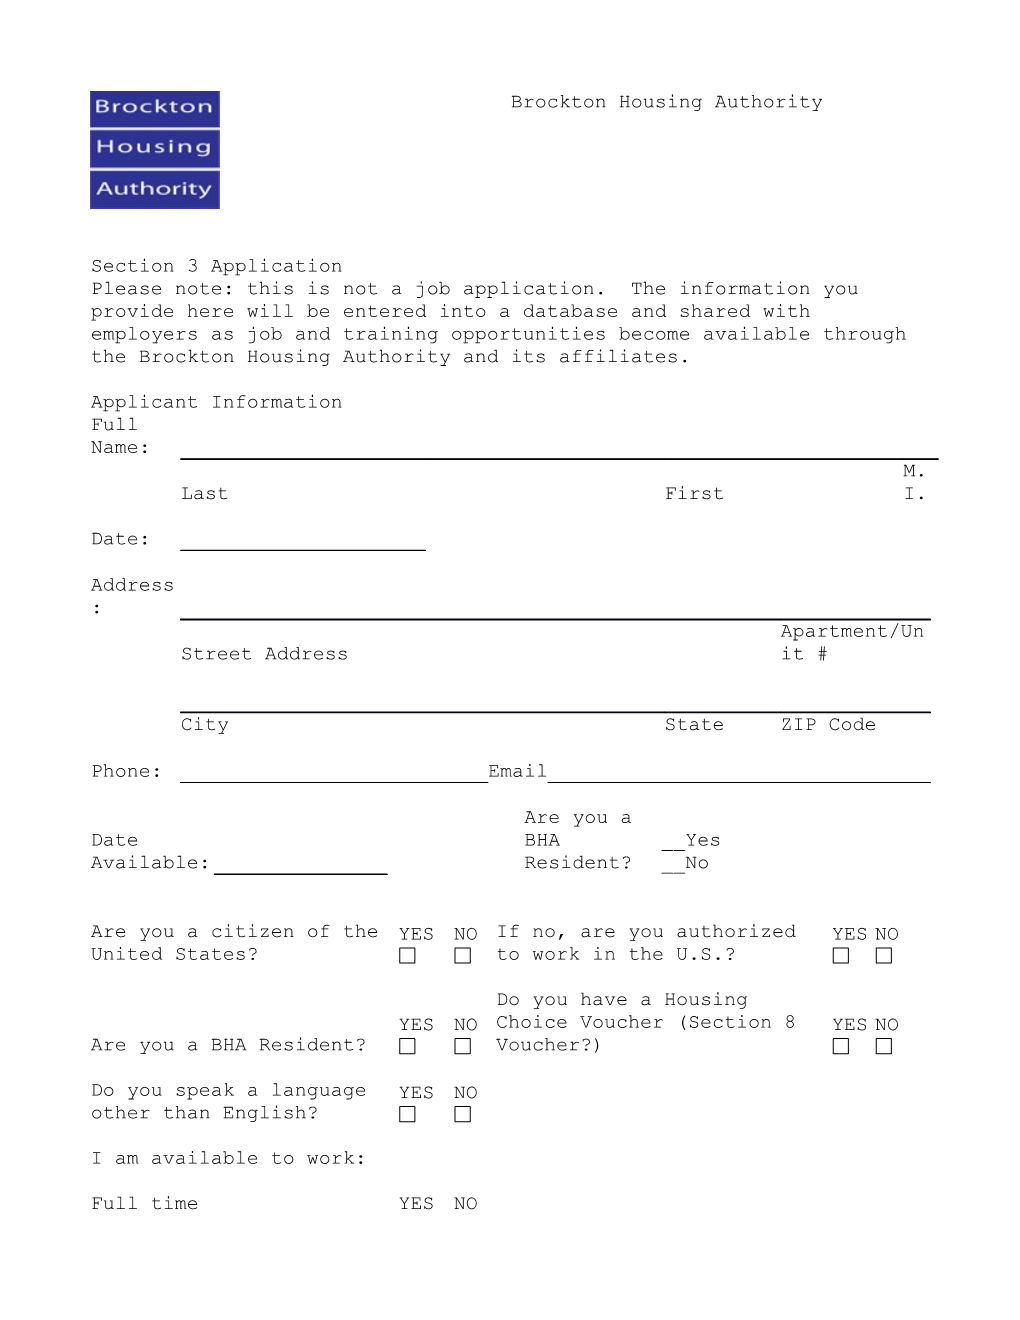 Section 3 Application